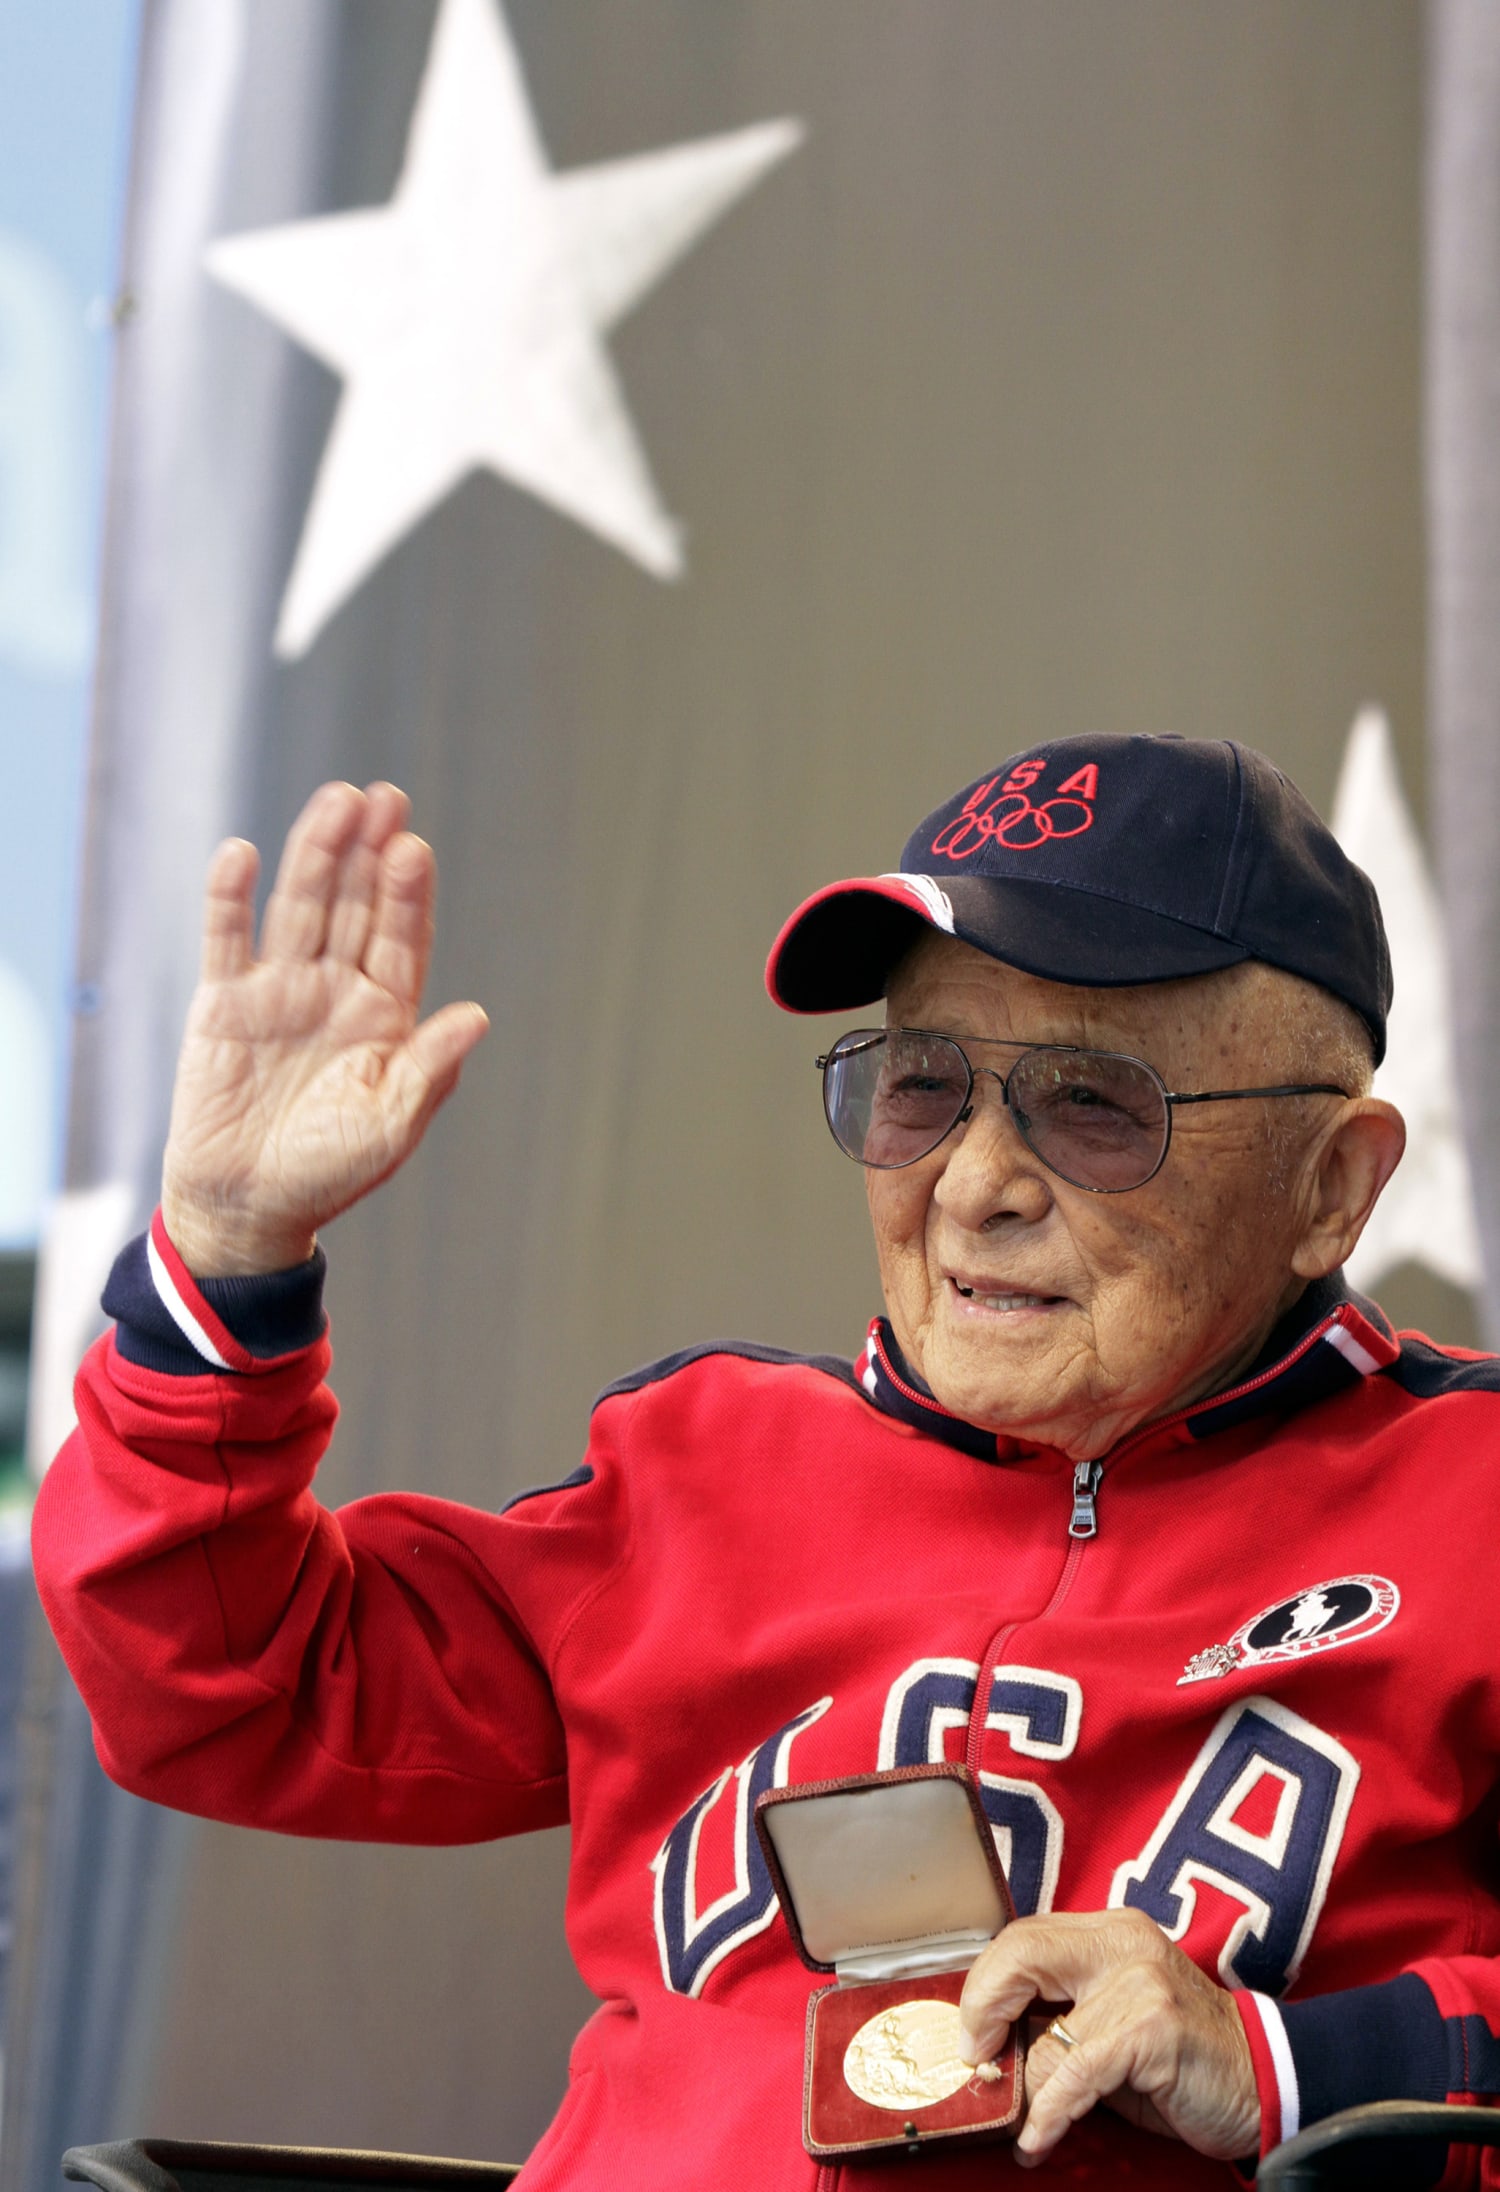 Sammy Lee, First Asian-American Man to Win Olympic Gold Medal, Dies at 96